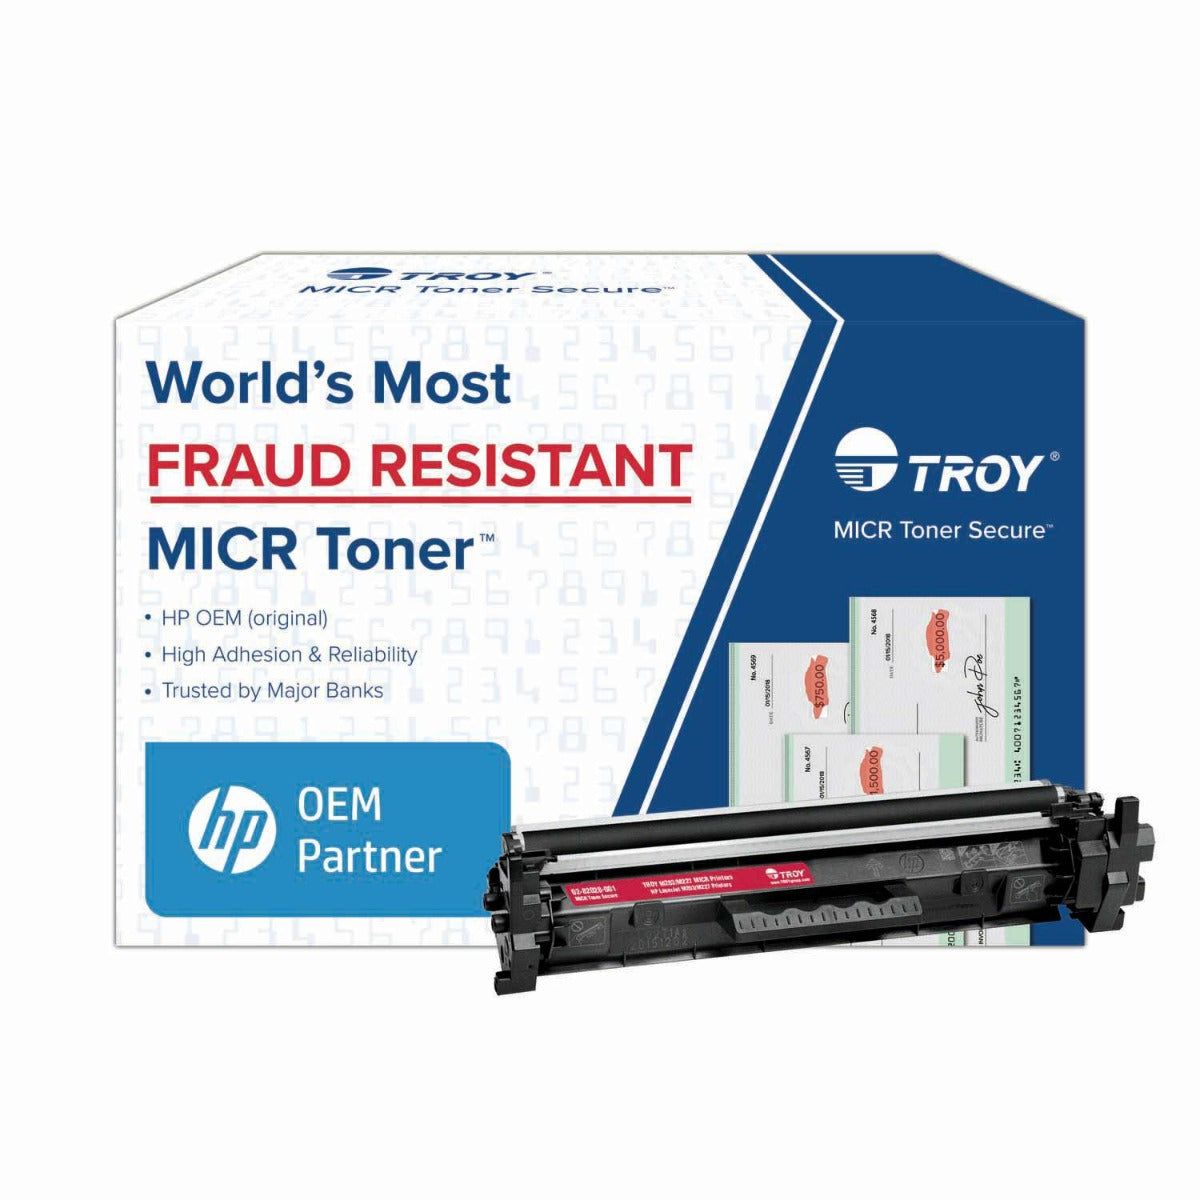 TROY M203/M227 MICR Toner Secure Standard Yield Cartridge (Coordinating HP Part Number: CF230A)